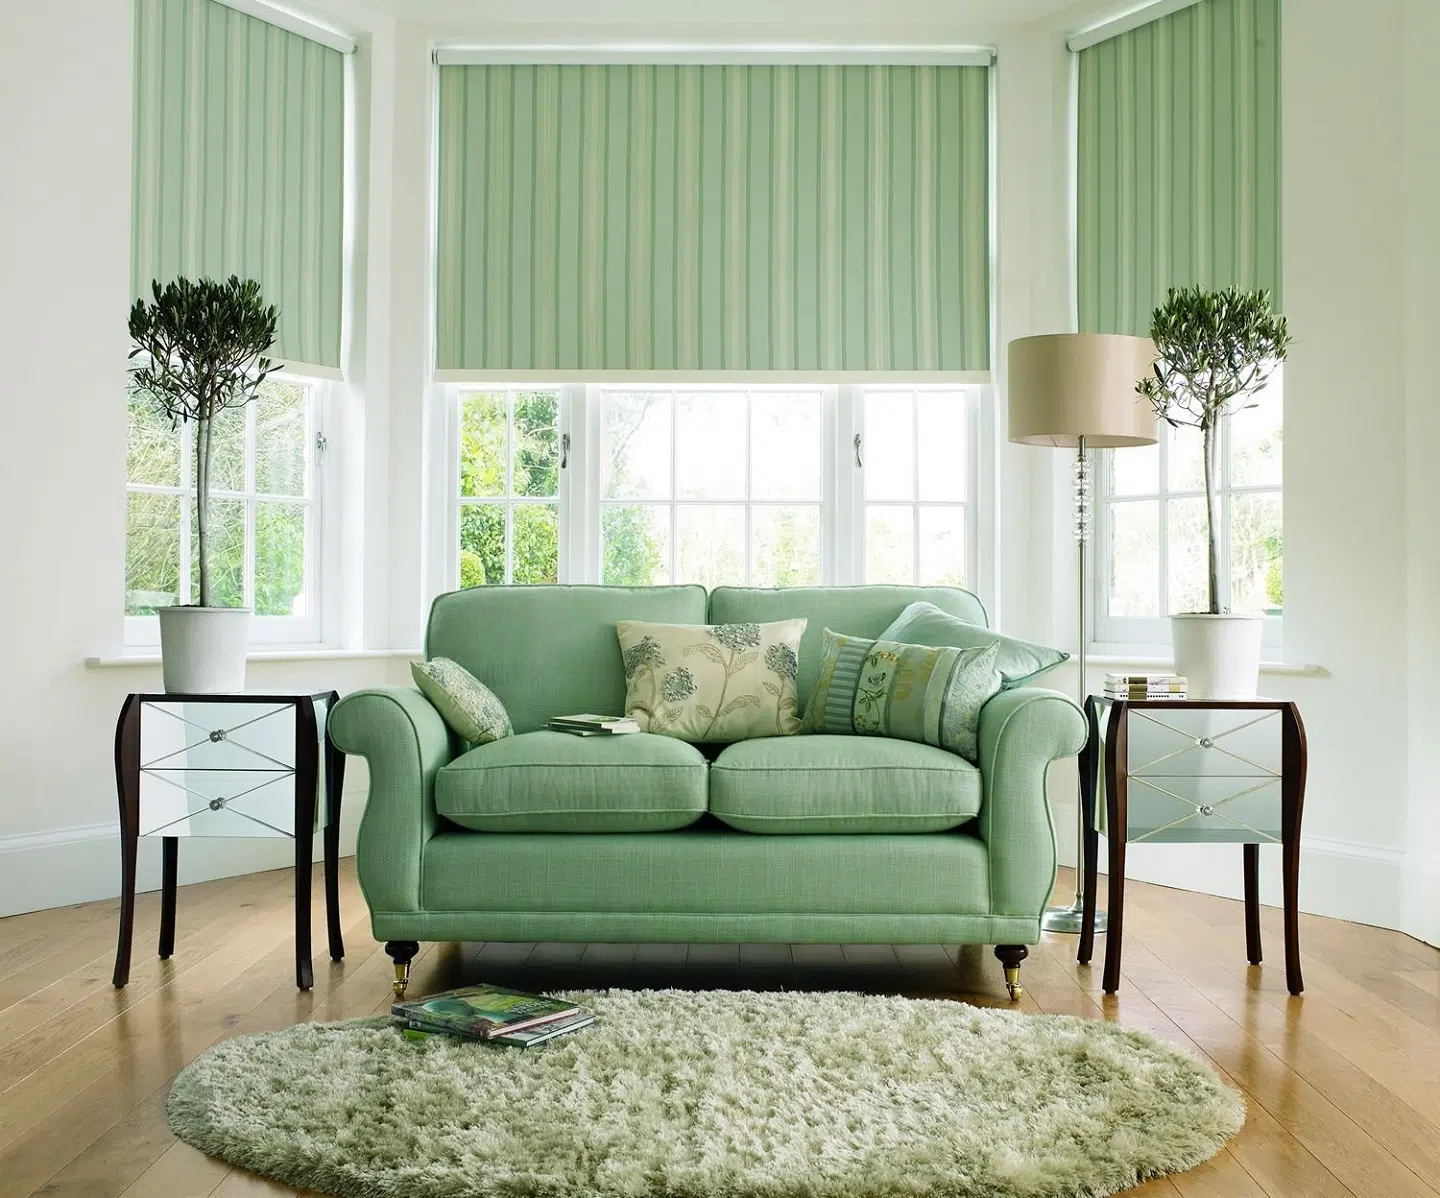 8. Green and White: Serene Simplicity